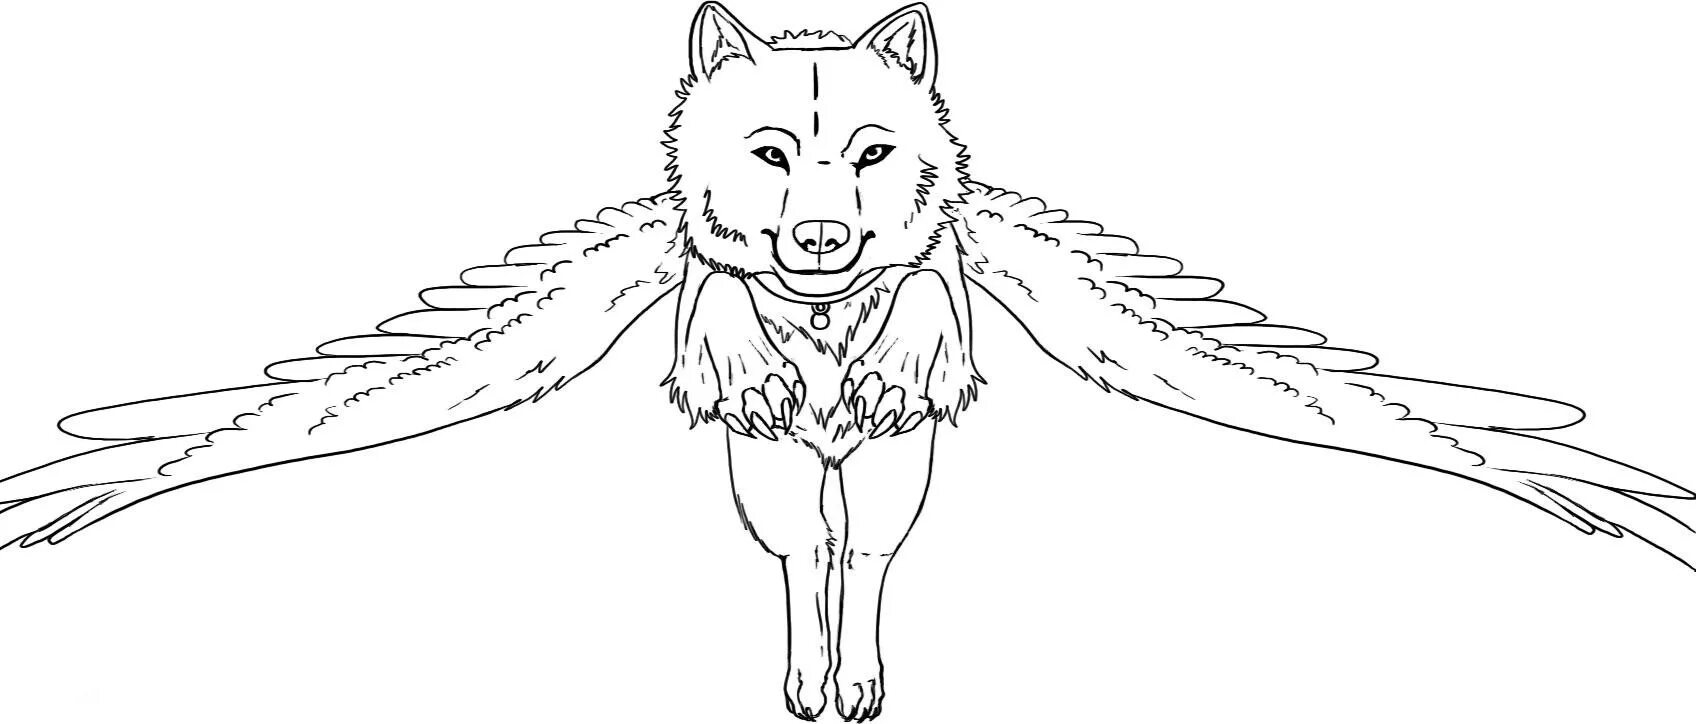 Dog with wings #13